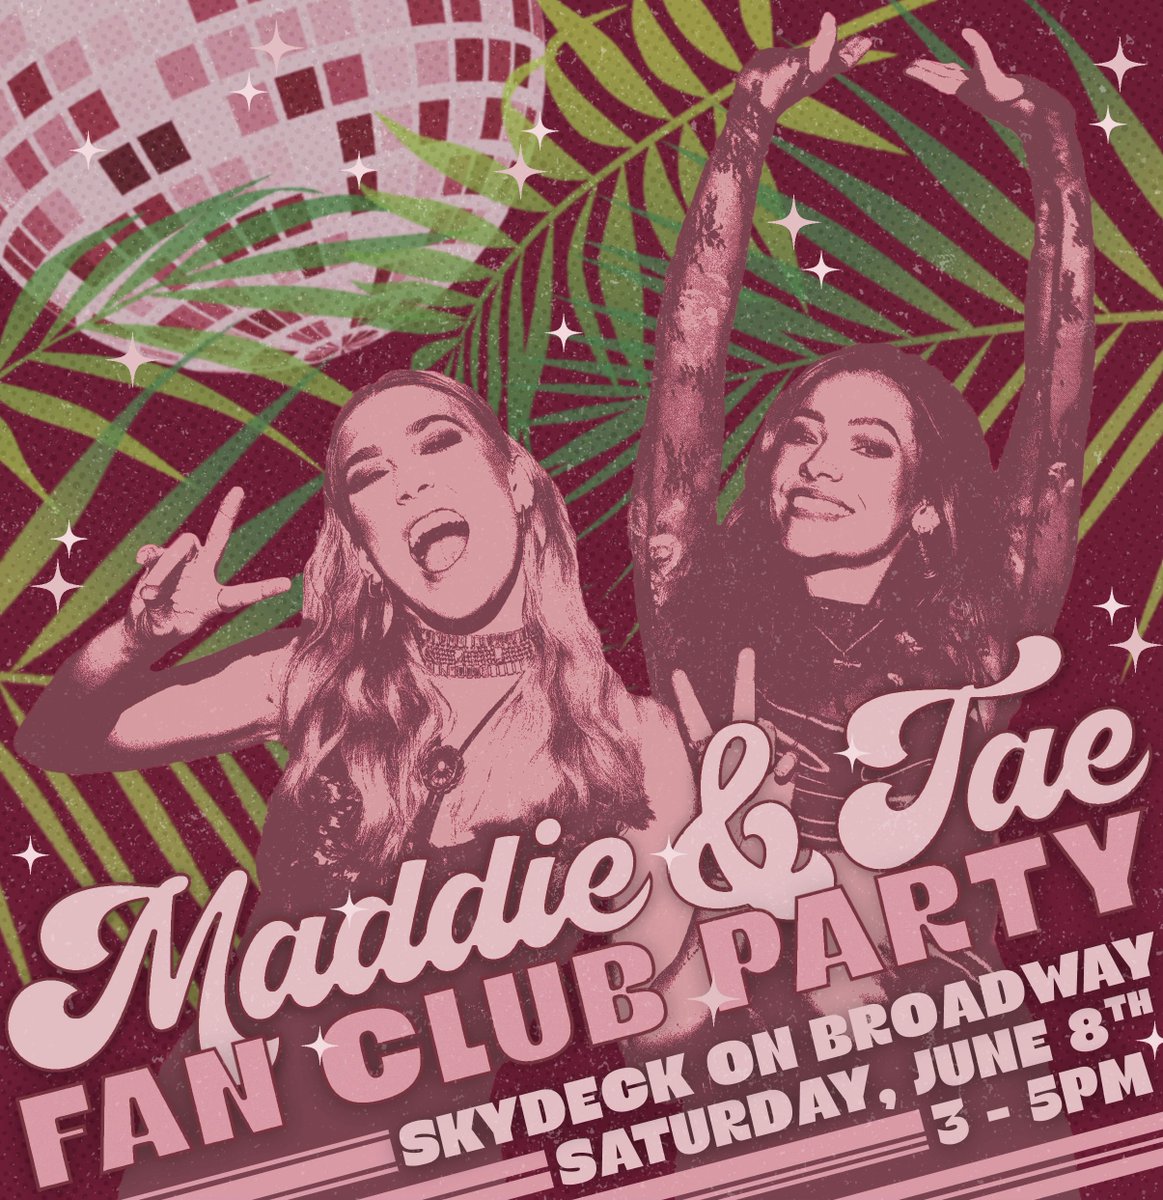 Ain’t no Sad Girl Summer at our Fan Club Party  on June 8! If you are in Nashville for #CMAFest, head on up to the Skydeck on Broadway from 3-5pm. RSVP now and arrive early (first 30 fans receive a meet and greet) and dance your bootys off!

RSVP : prekindle.com/promo/id/-2853…